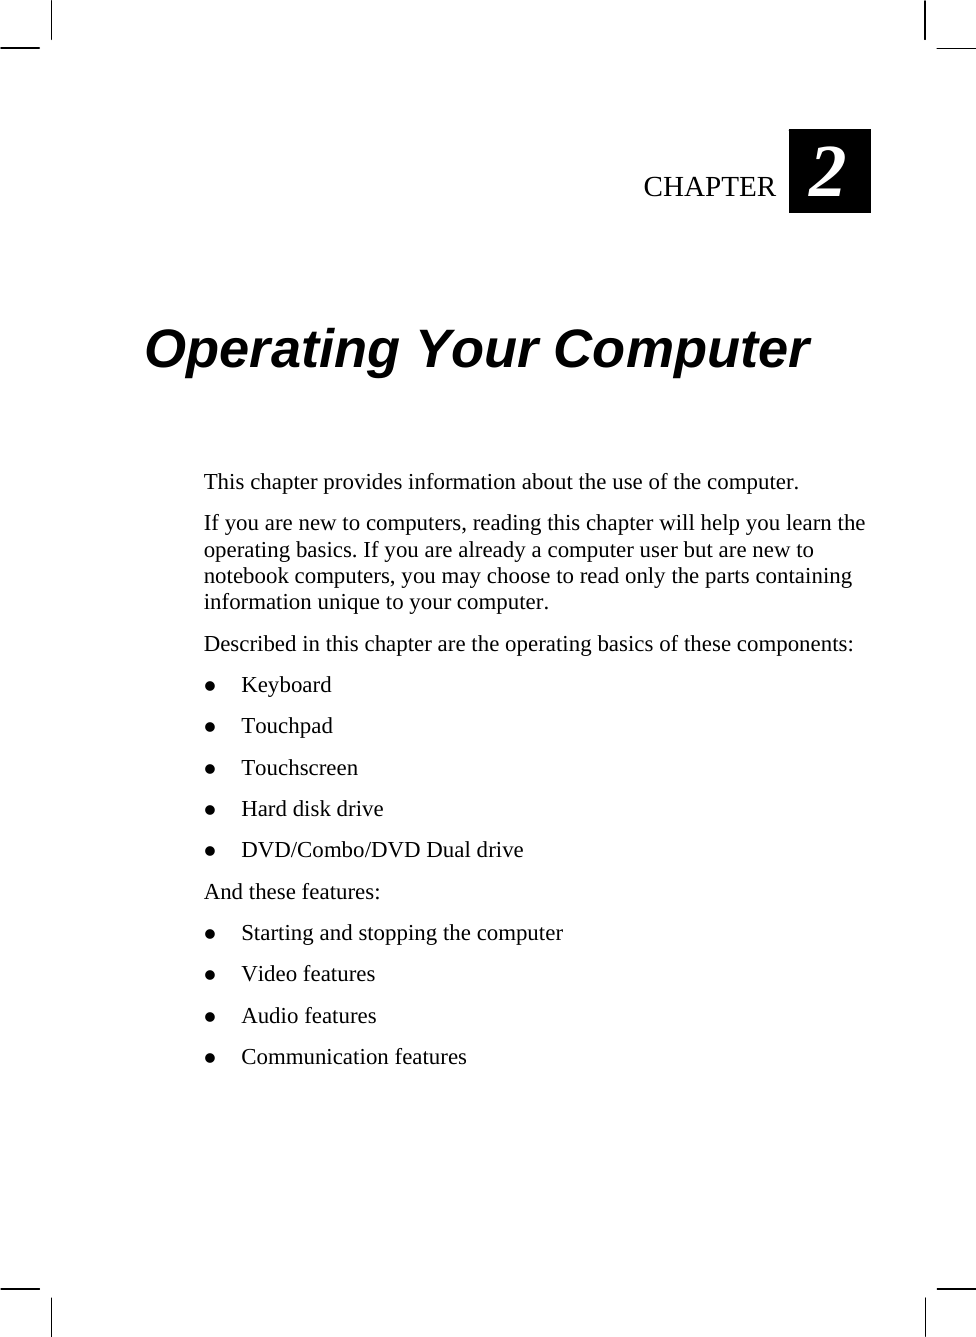  2CHAPTER   Operating Your Computer This chapter provides information about the use of the computer. If you are new to computers, reading this chapter will help you learn the operating basics. If you are already a computer user but are new to notebook computers, you may choose to read only the parts containing information unique to your computer. Described in this chapter are the operating basics of these components: z Keyboard z Touchpad z Touchscreen z Hard disk drive z DVD/Combo/DVD Dual drive And these features: z Starting and stopping the computer z Video features z Audio features z Communication features   